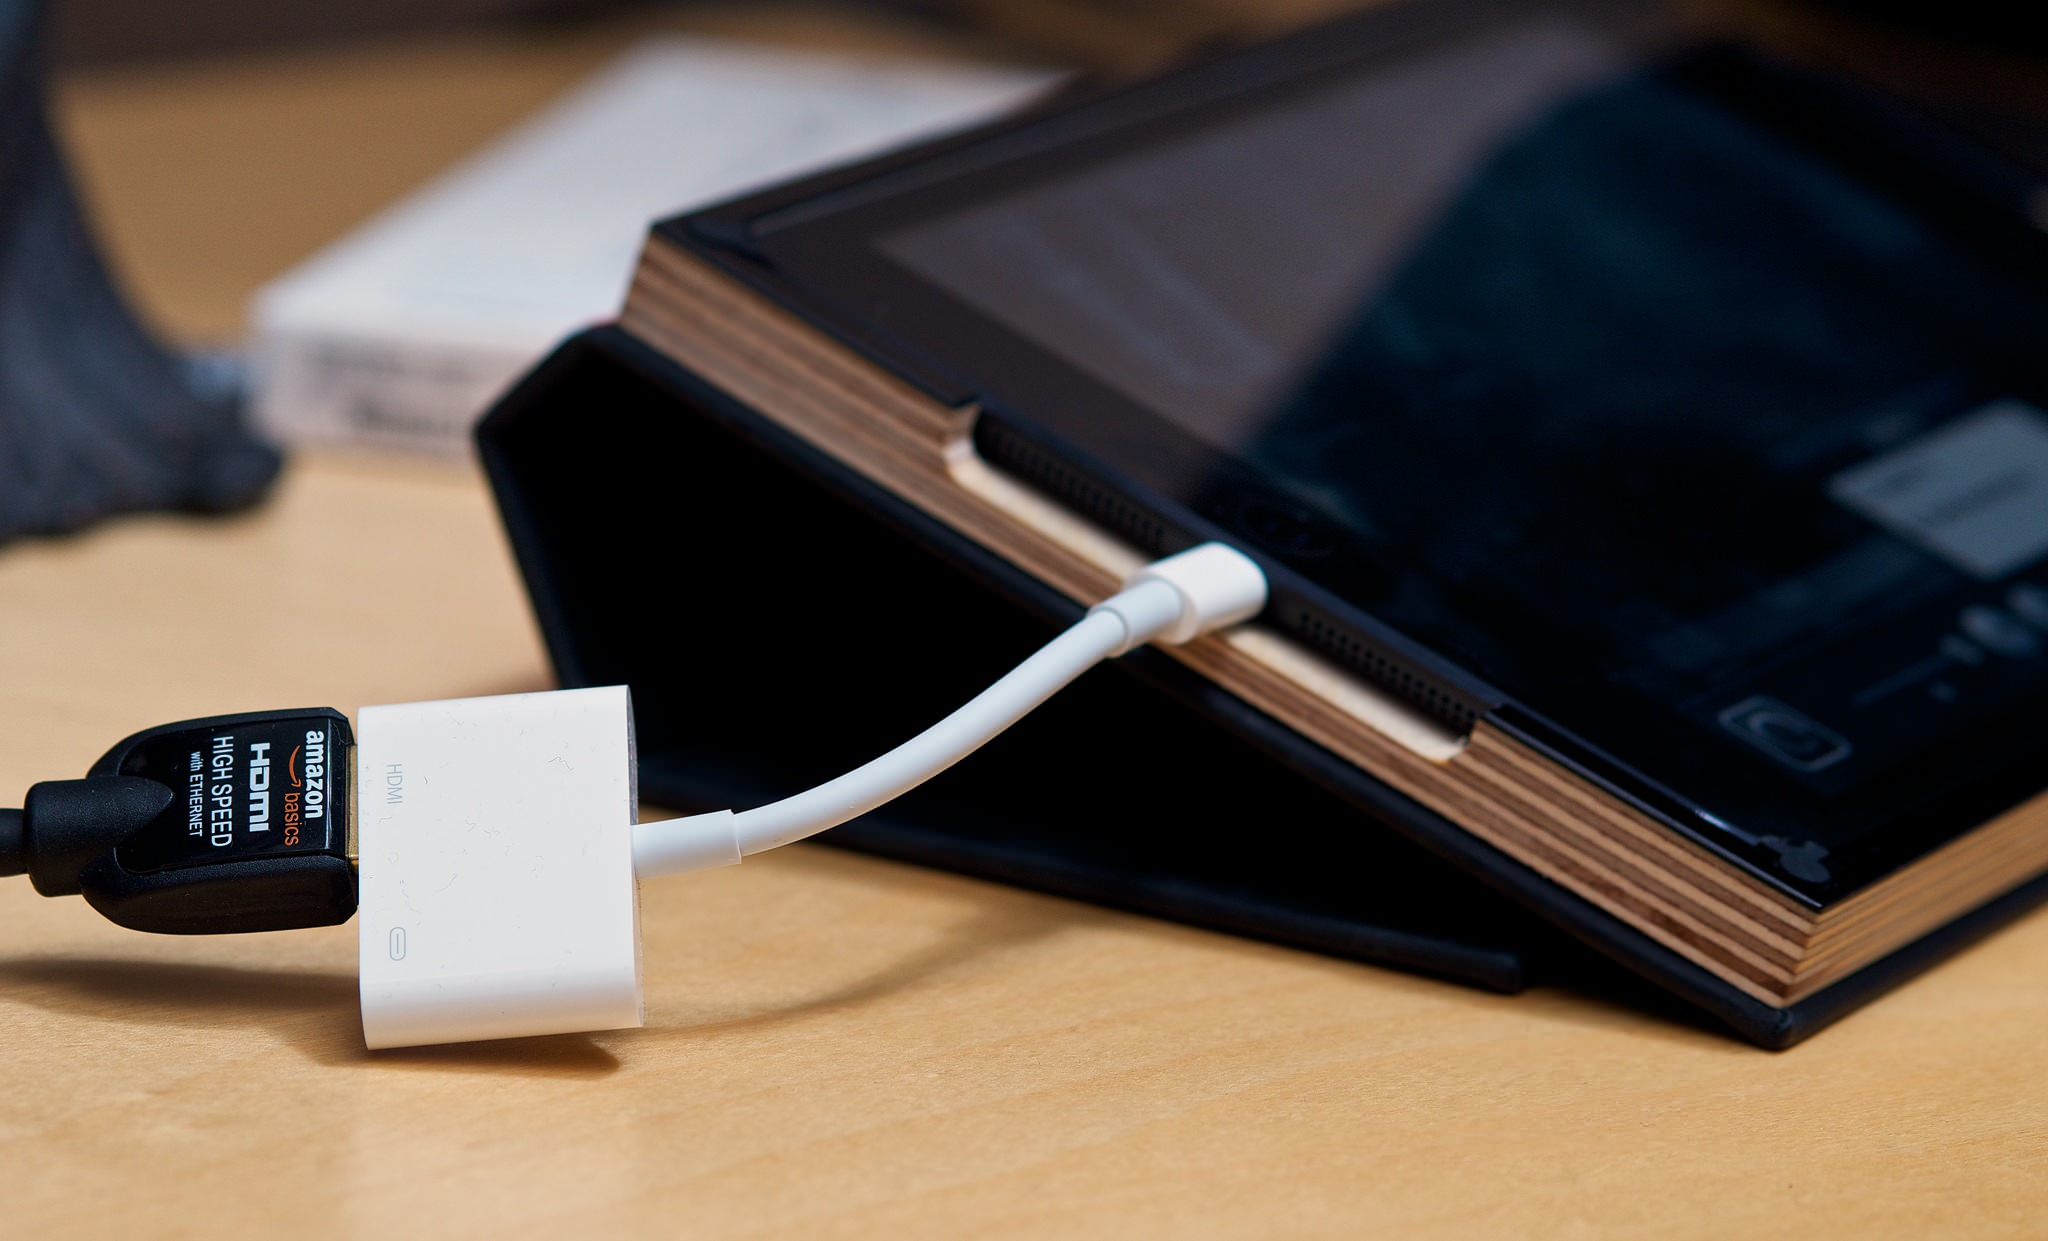 Apple's AV adapter uses Airplay and has a computer inside it | Digital Trends